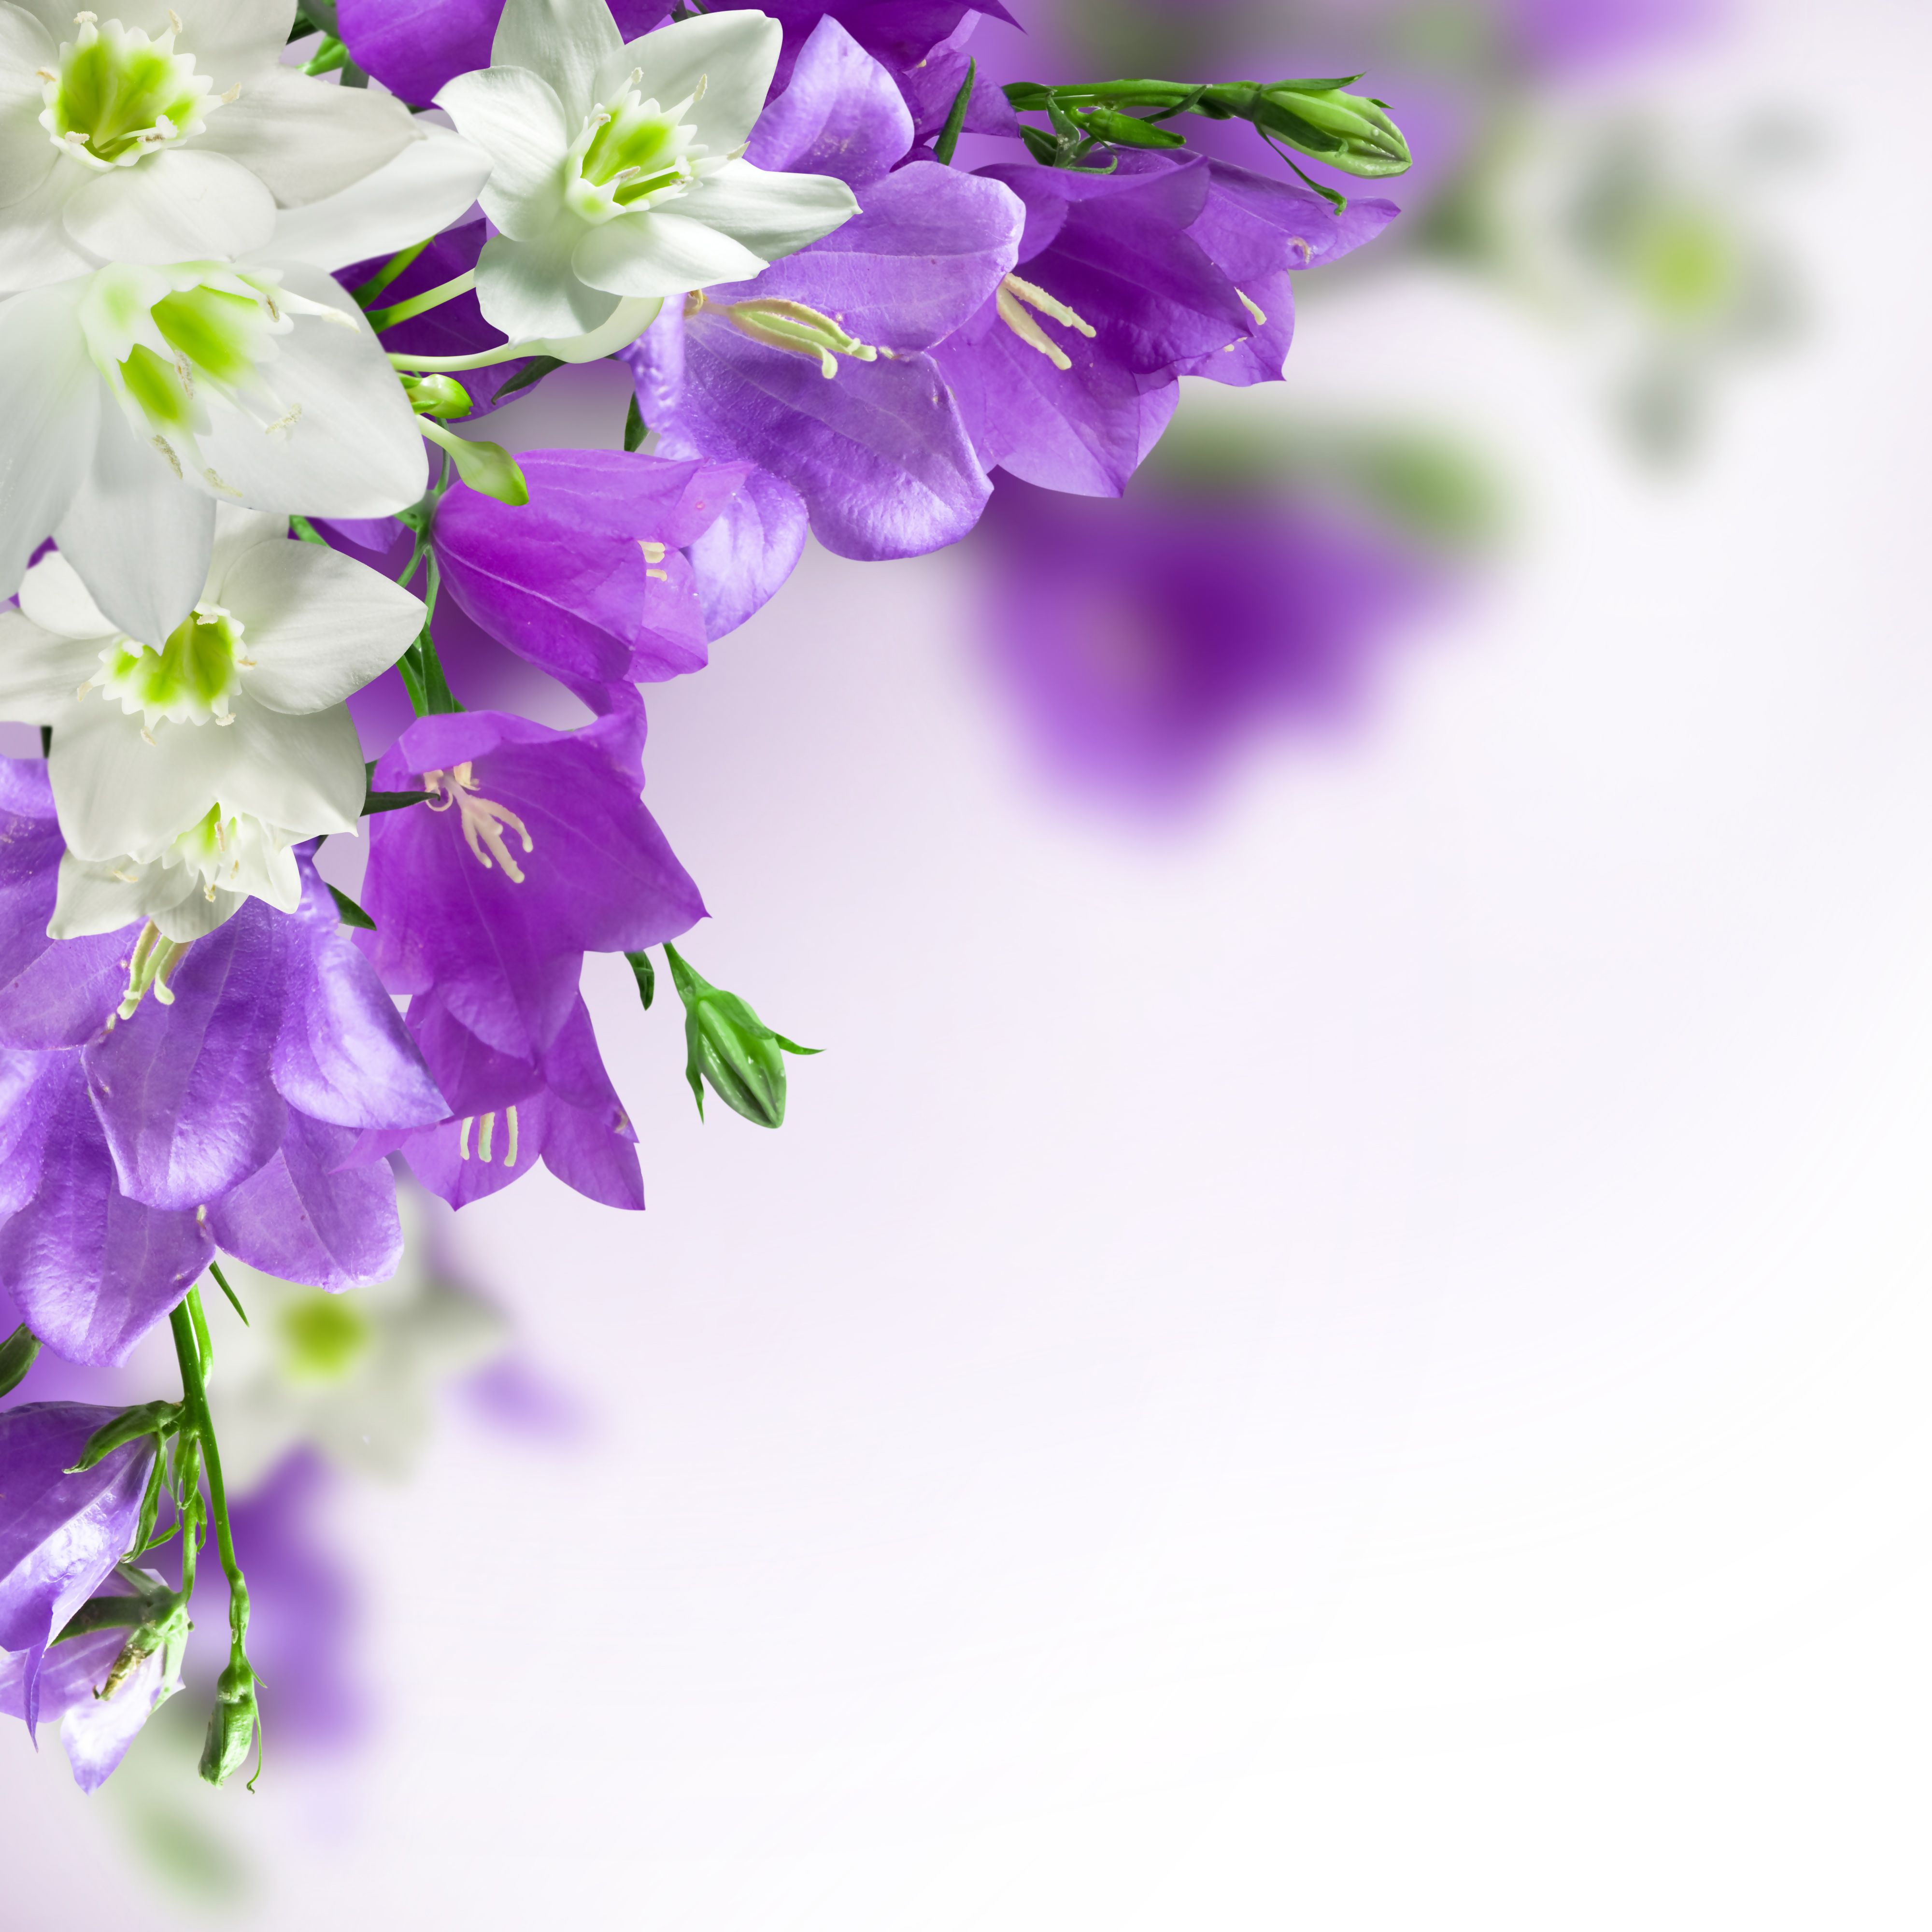 Spring Background with White and Purple Flowers | Frames & Cards ...